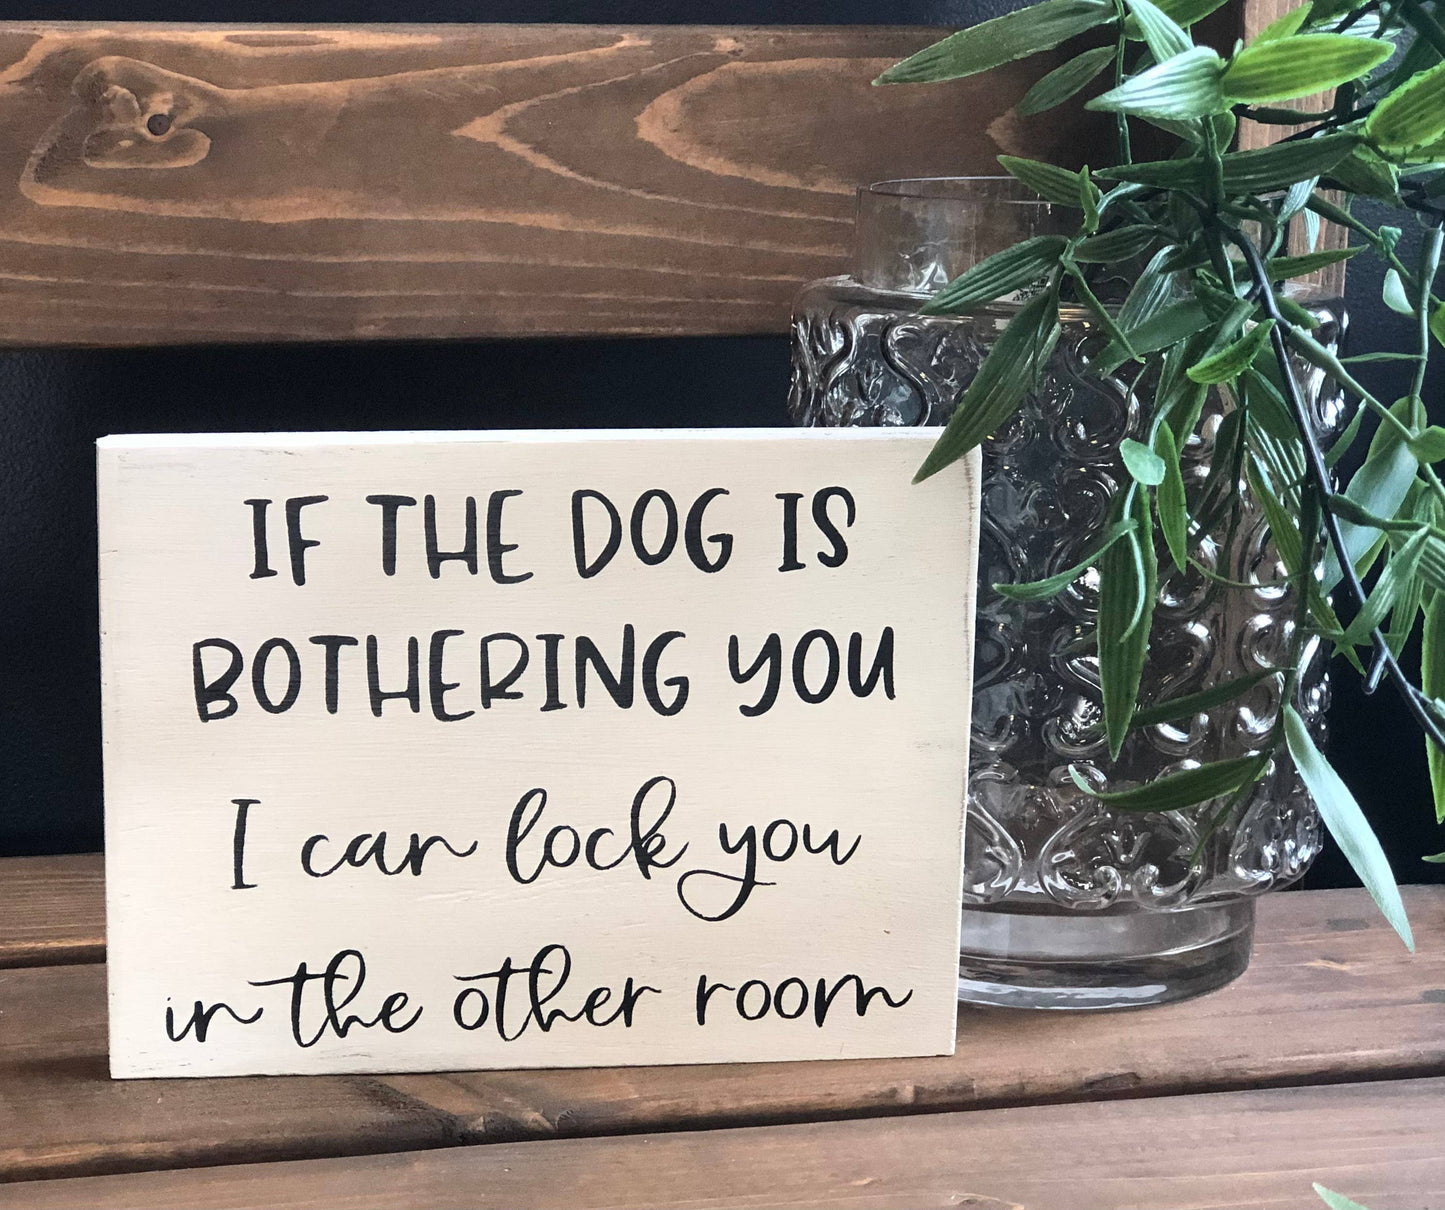 Dog is Bothering You - Funny Rustic Wood White Sign